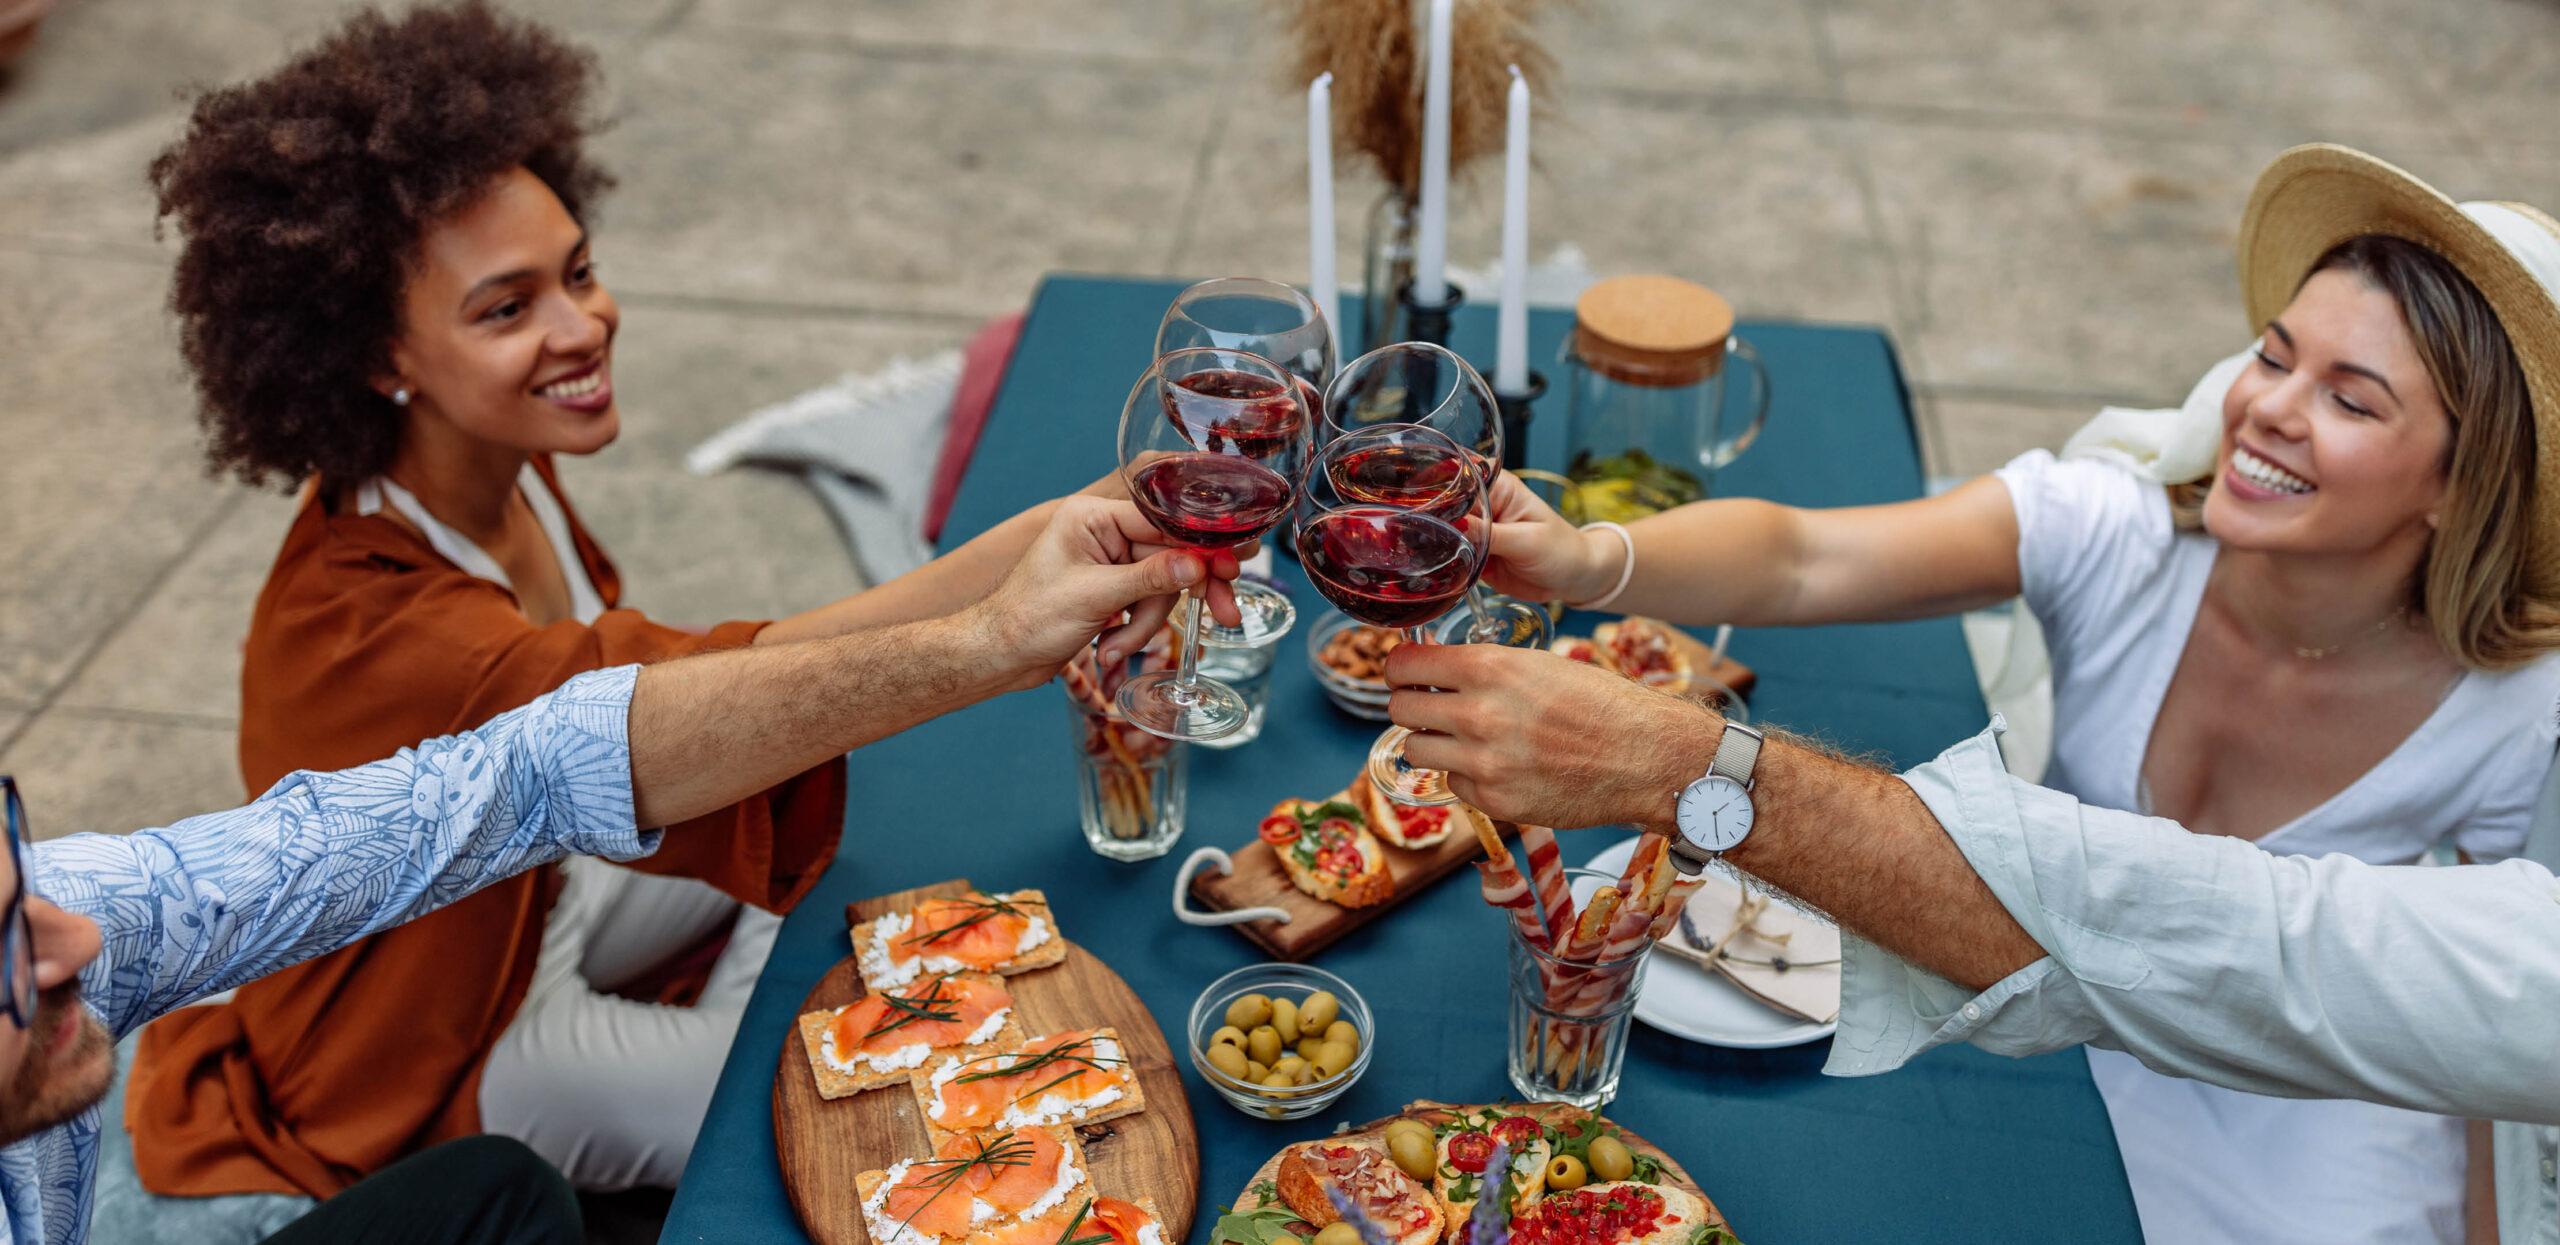 Two couples enjoying red wine and sophisticated hors d'ouevres at an outdoor table during summer